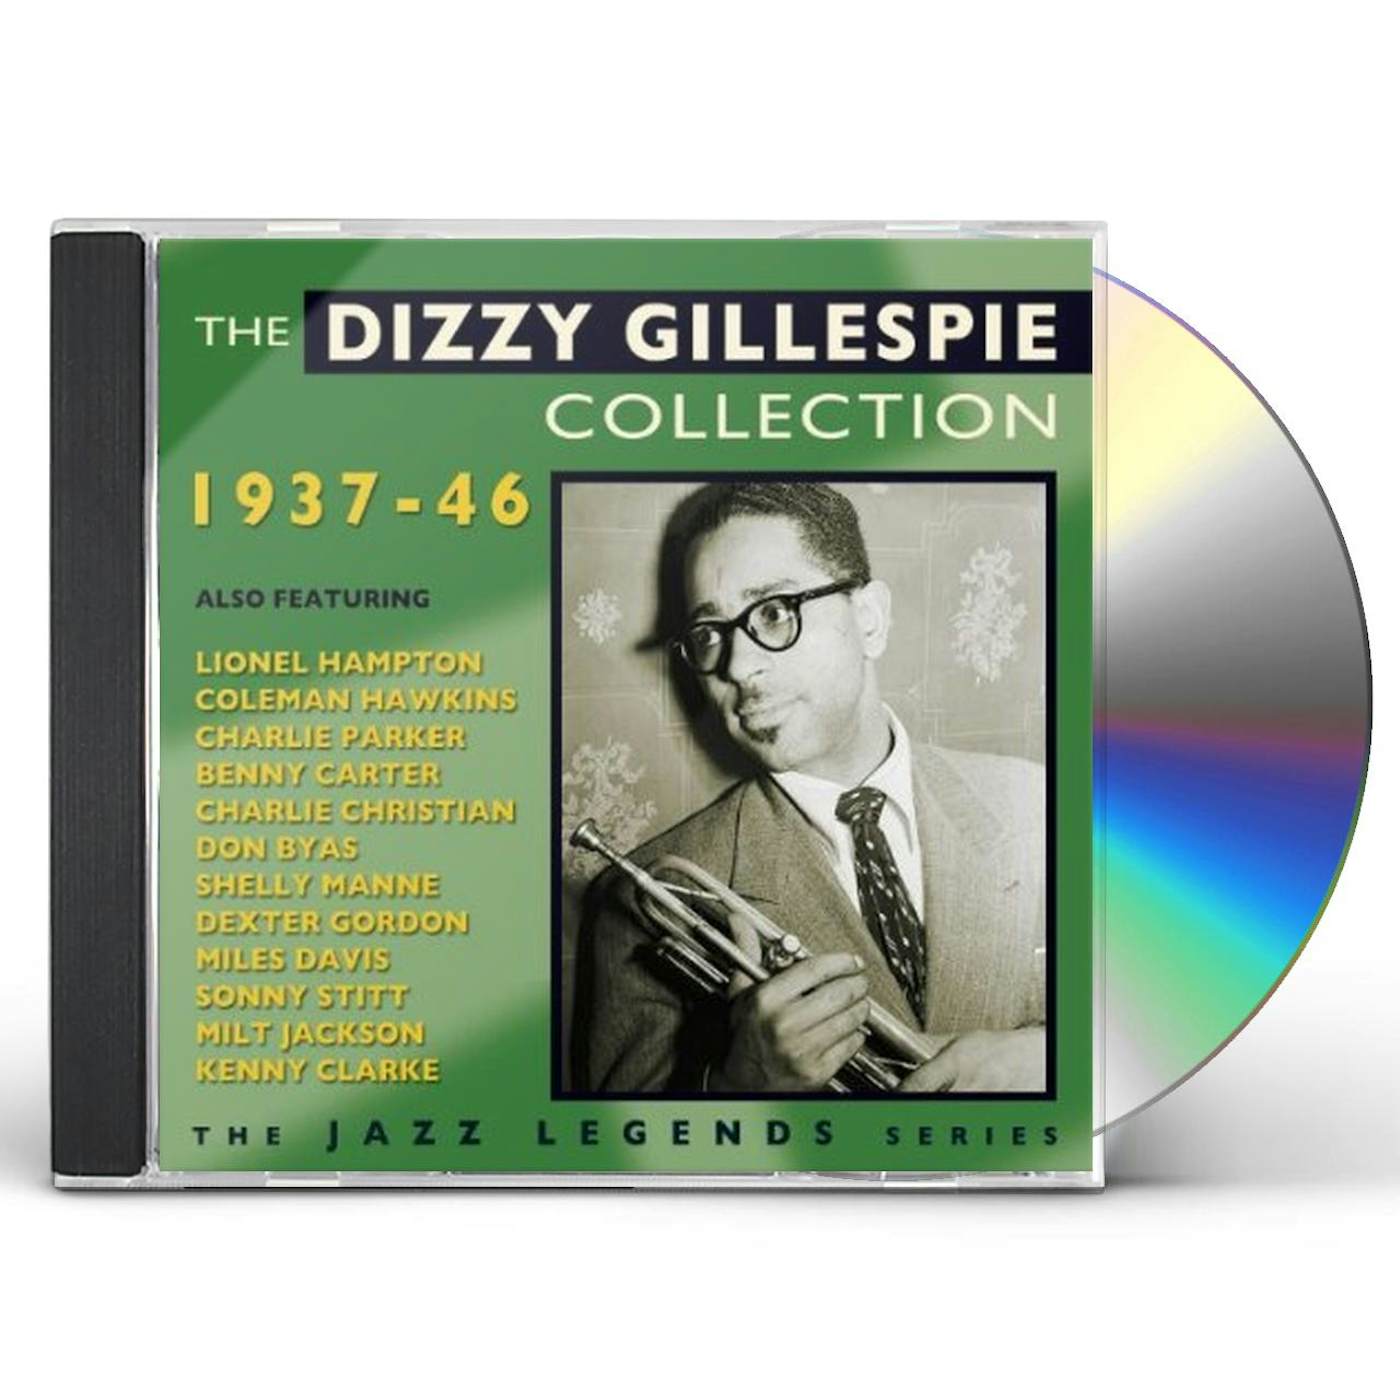 DIZZY GILLESPIE COLLECTION 1937-46 CD